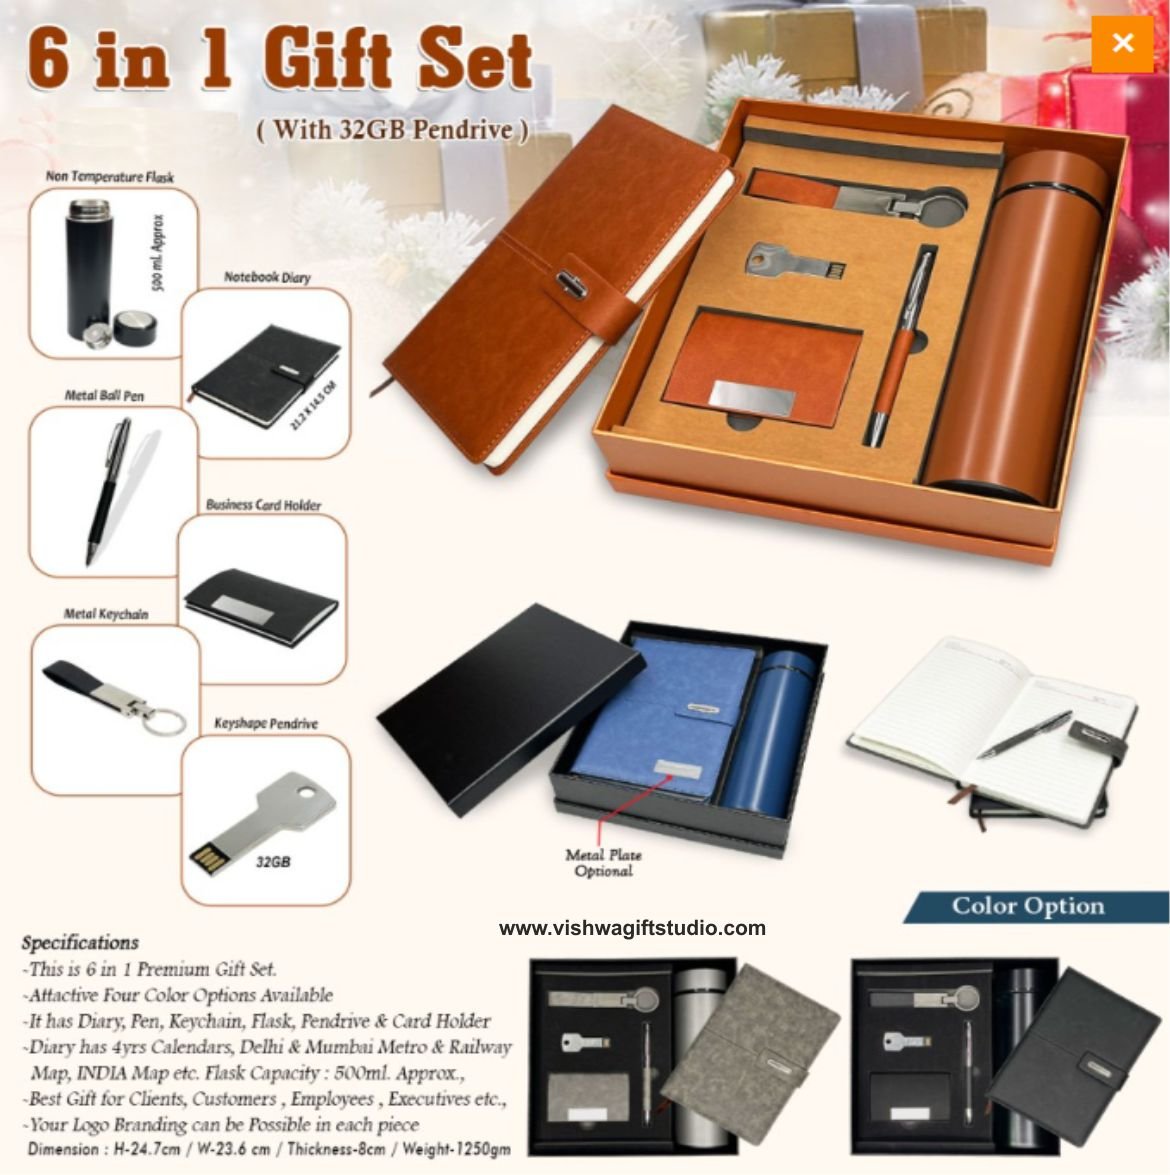 Executive Corporate Gift Set for Premium and Thoughtful Corporate Gifts in  Rajkot at best price by Giftt Basket India.com - Justdial